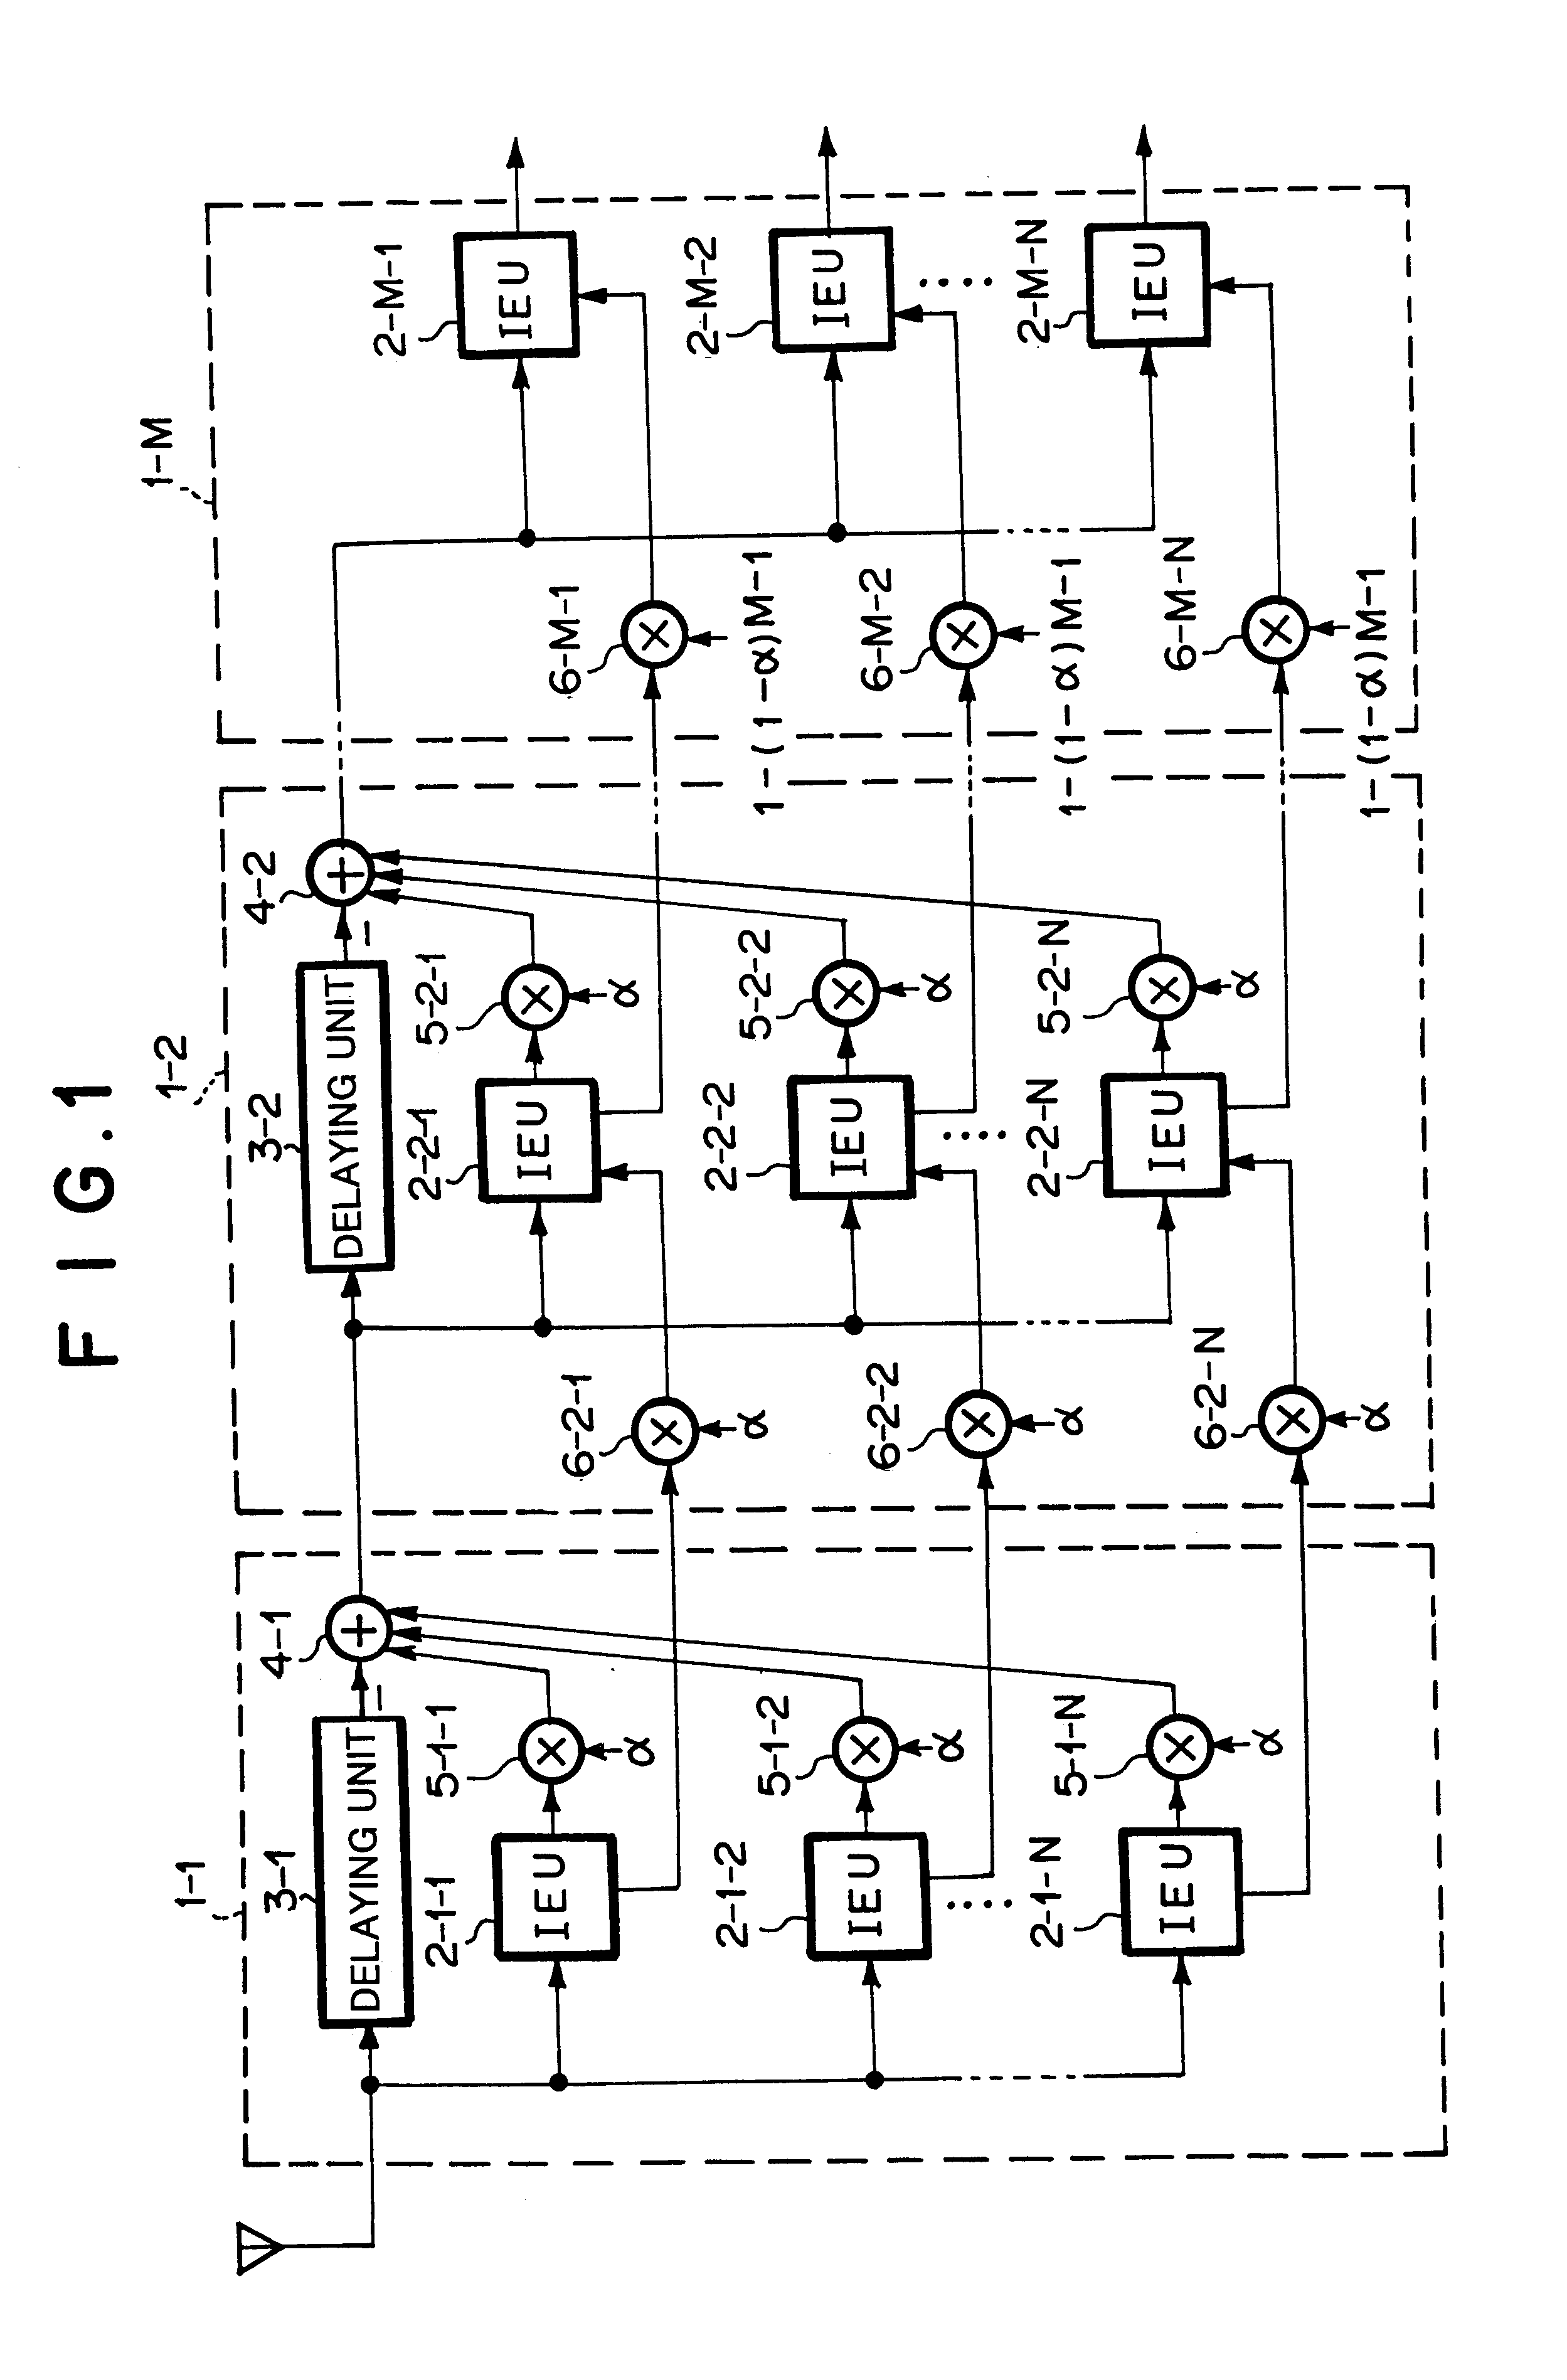 Multi-user receiving apparatus and CDMA communication system